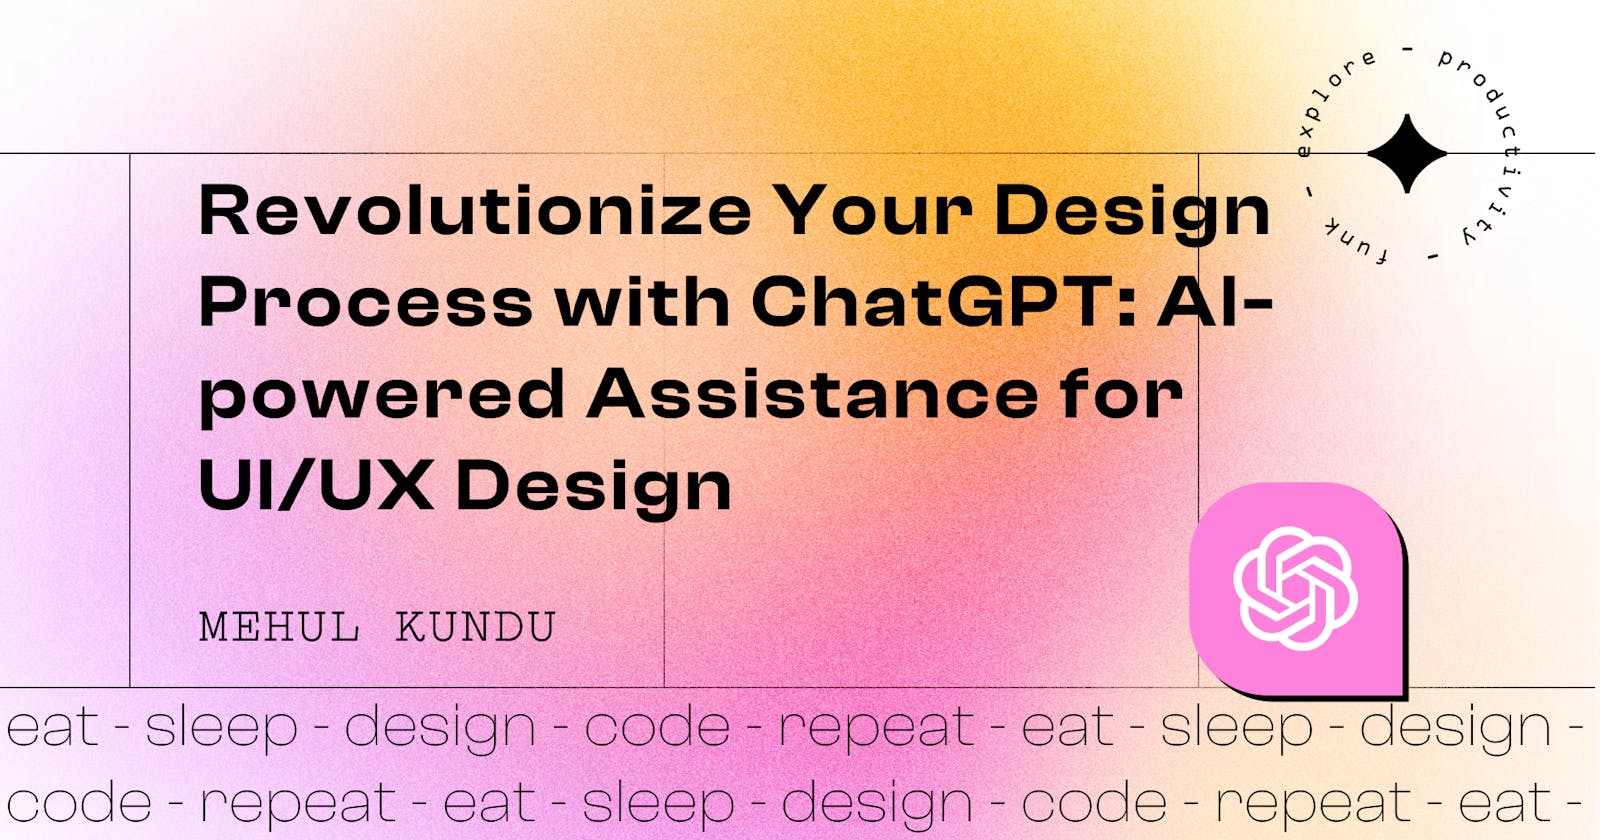 Revolutionize Your Design Process with ChatGPT: AI-powered Assistance for UI/UX Design